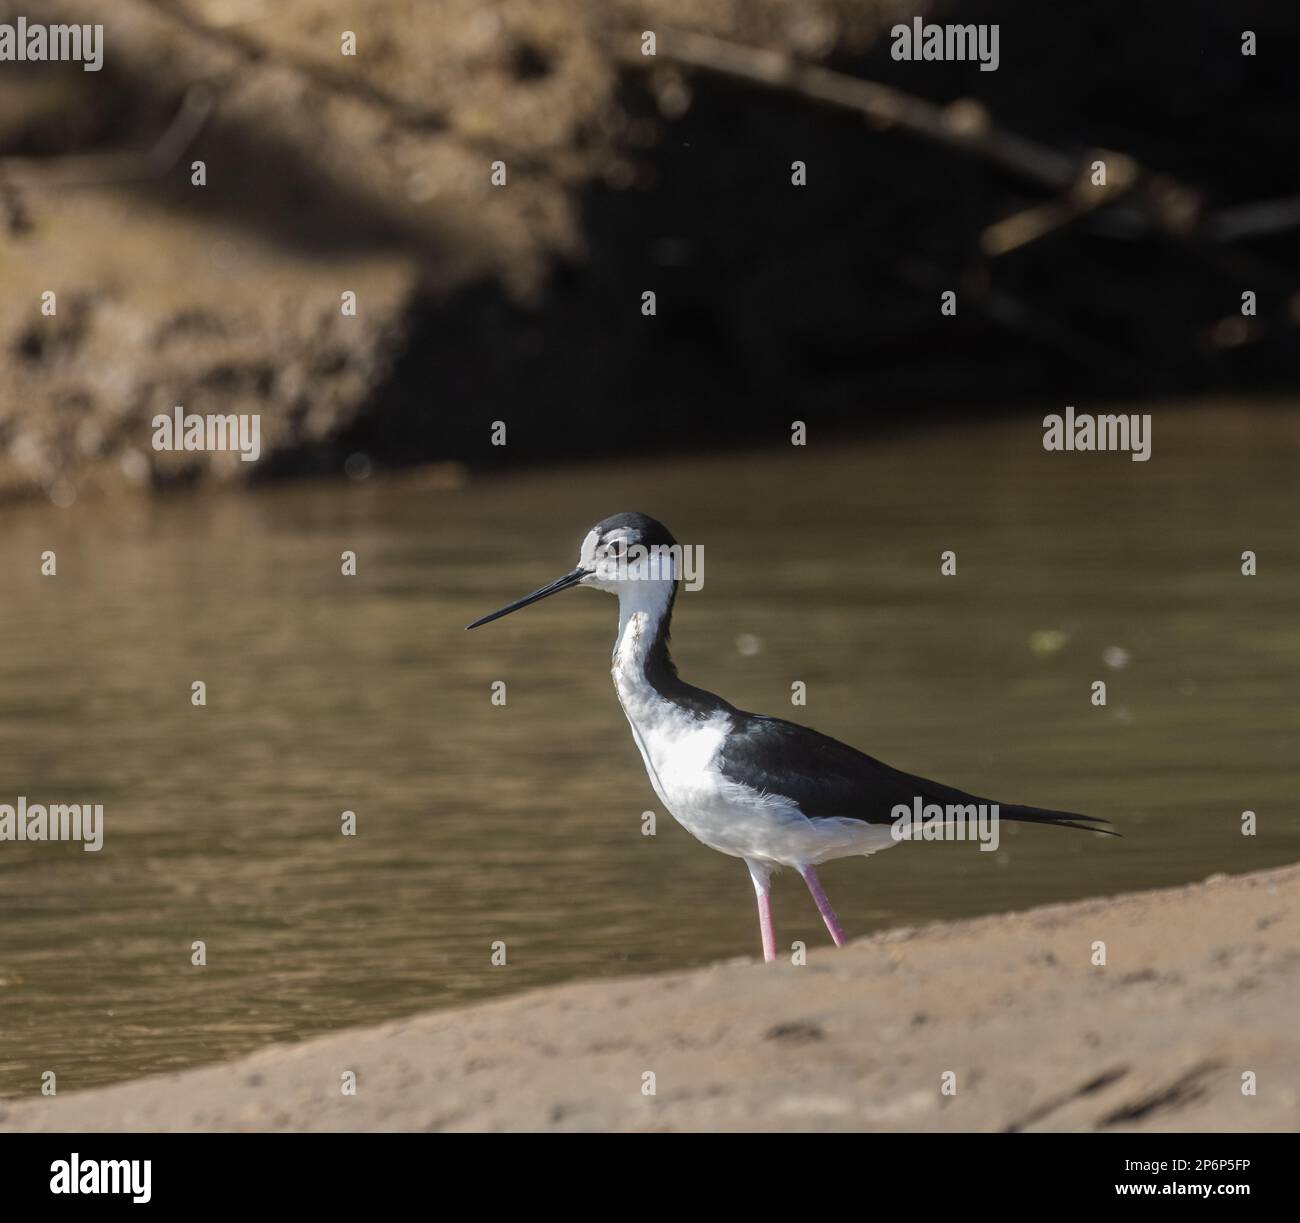 A black-necked Stilt on the bank of the Tarcoles River in Costa Rica Stock Photo